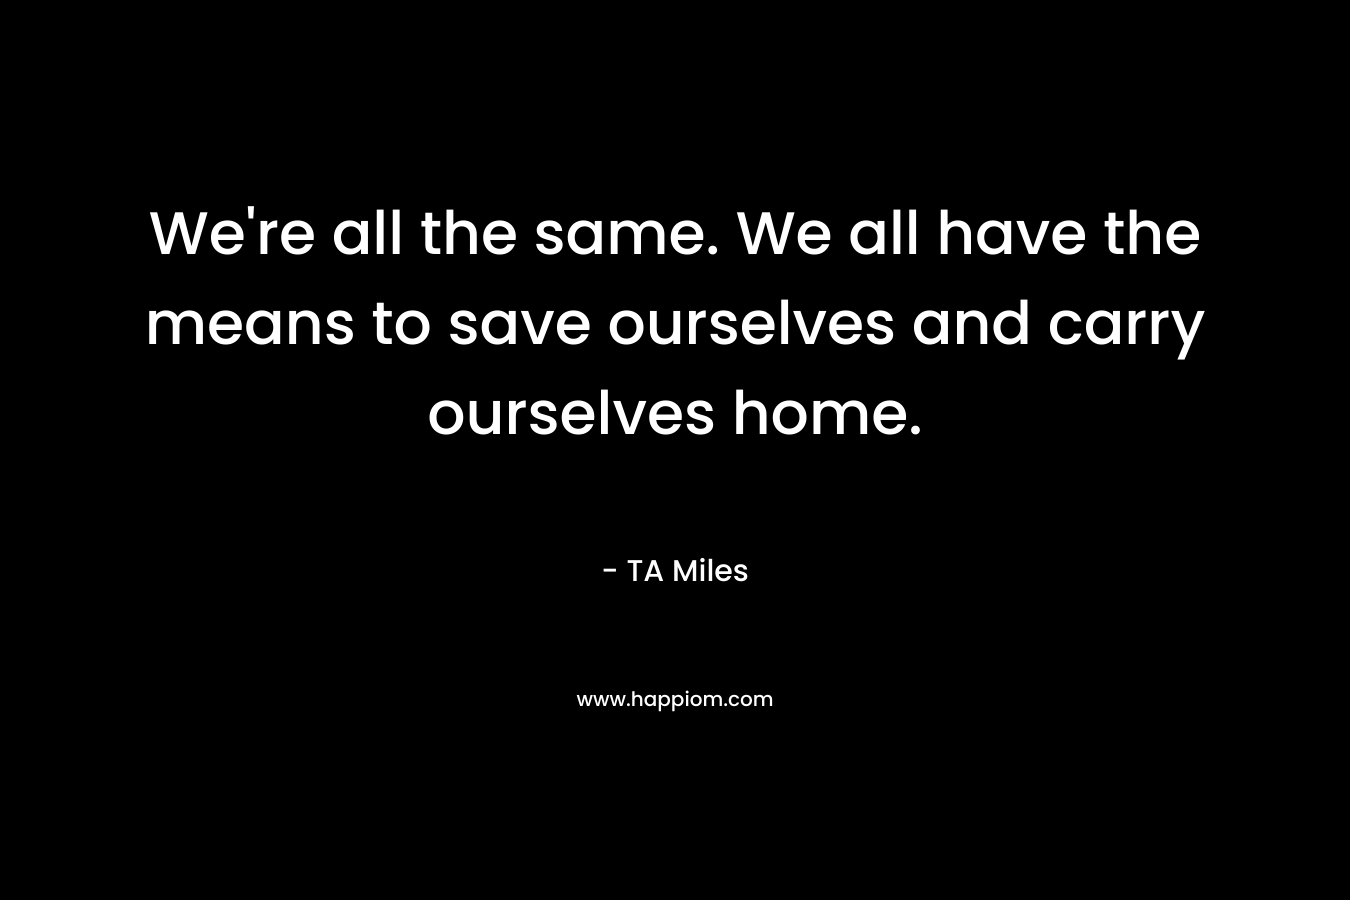 We're all the same. We all have the means to save ourselves and carry ourselves home.